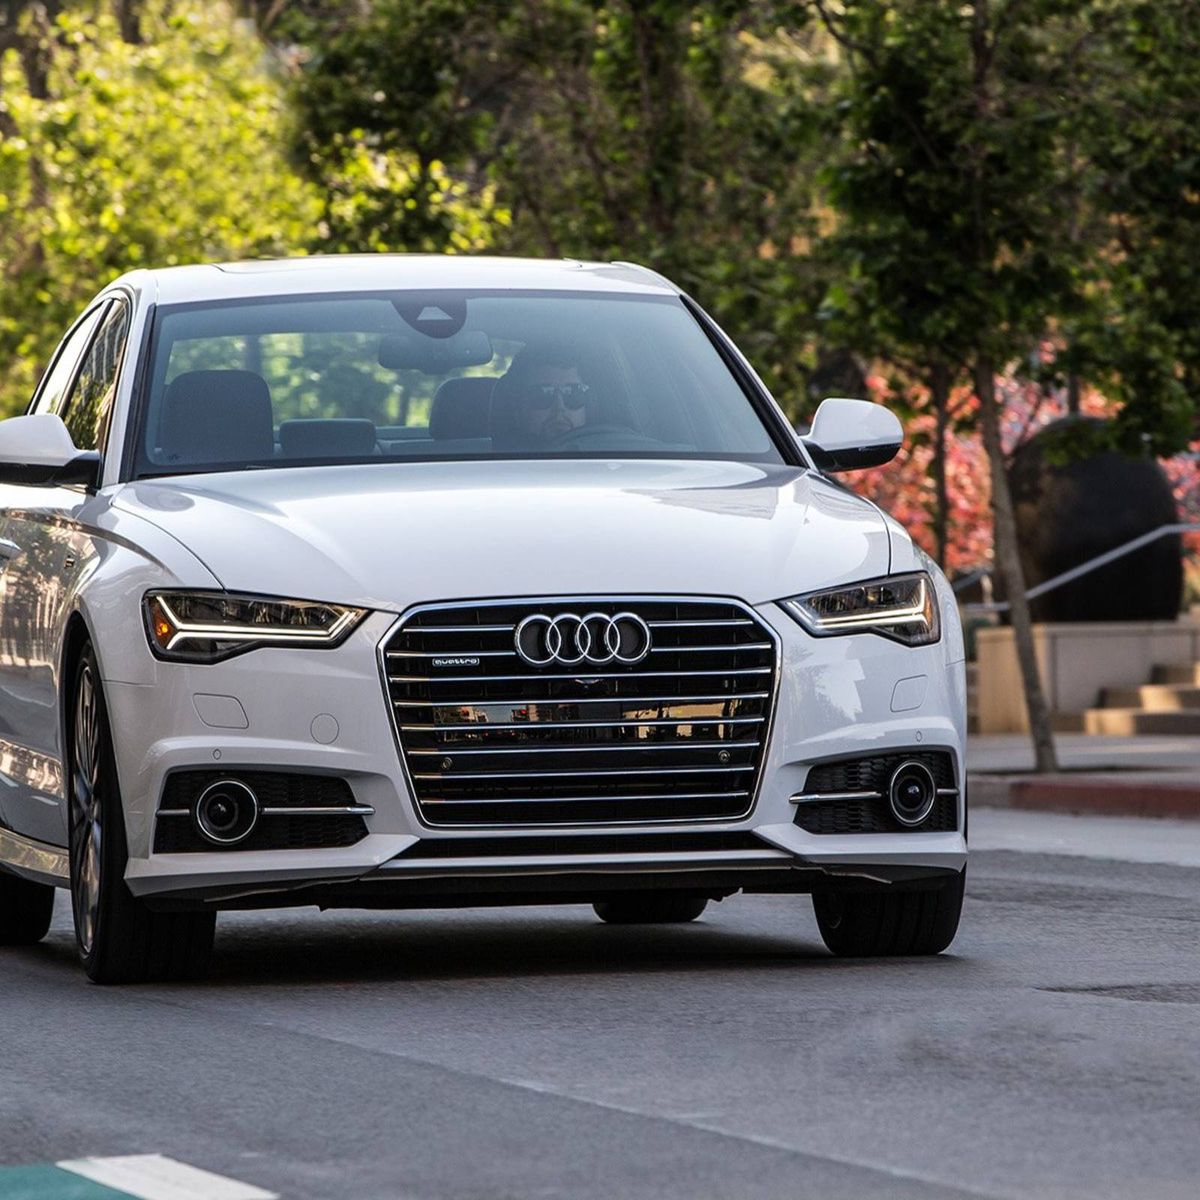 2016 Audi A6 3.0T review notes: Why look elsewhere?